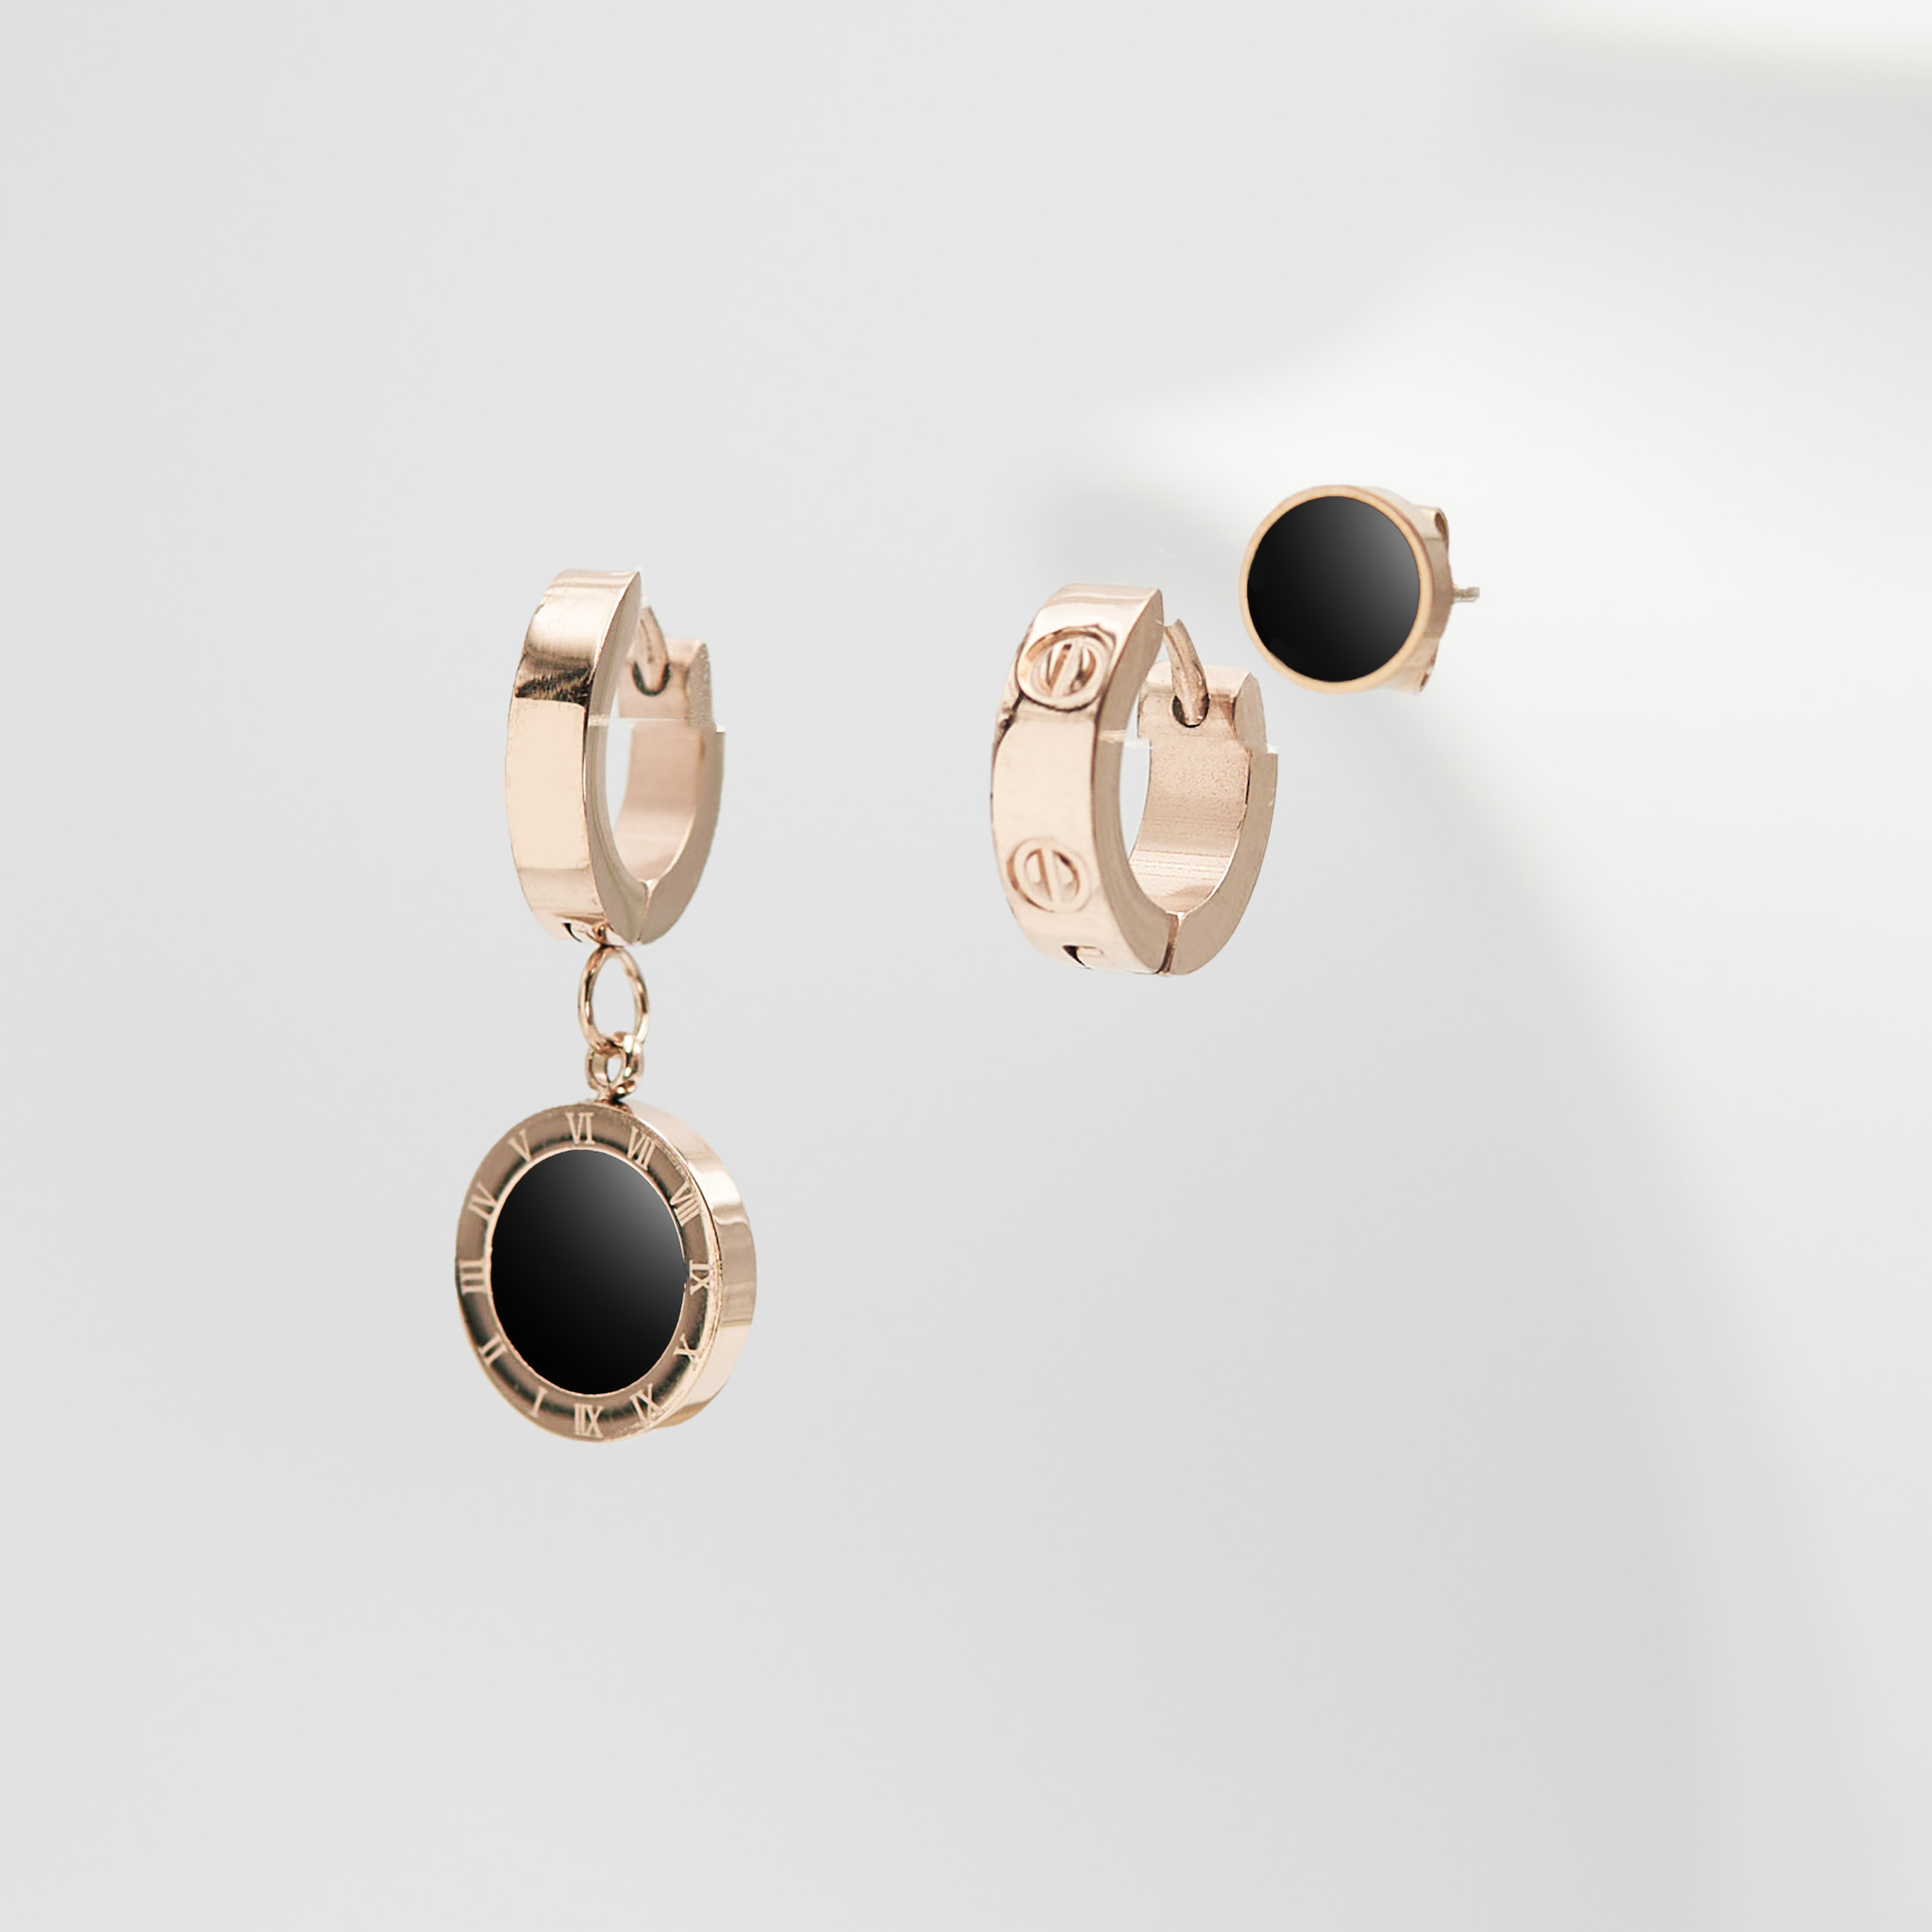 2- Era Lucky Shoot Rose Gold Edition -Örhänge Set 316 L - Special Earrings From SWEVALI